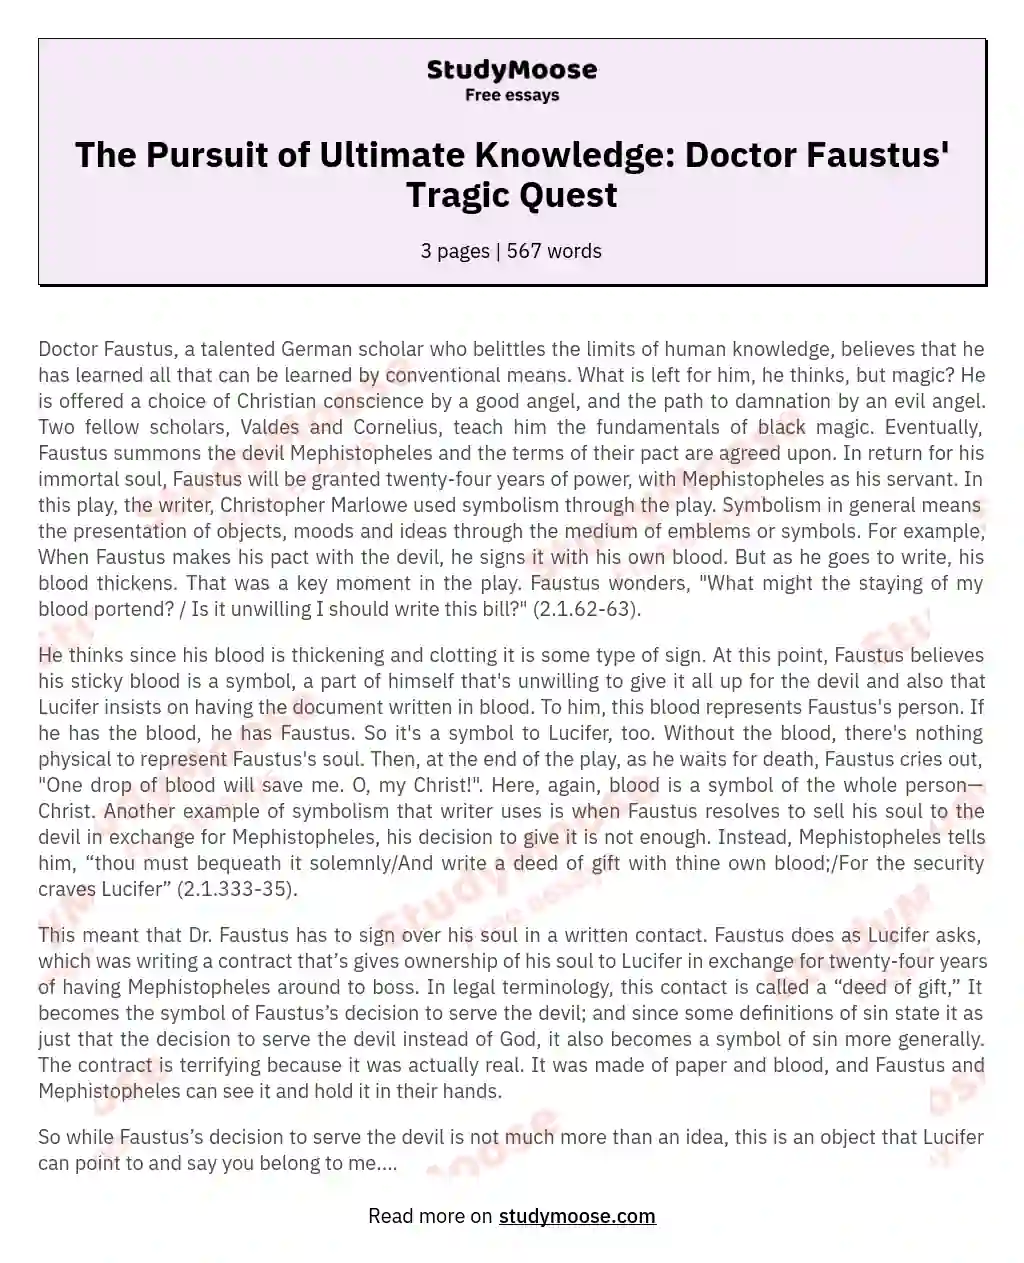 The Pursuit of Ultimate Knowledge: Doctor Faustus' Tragic Quest